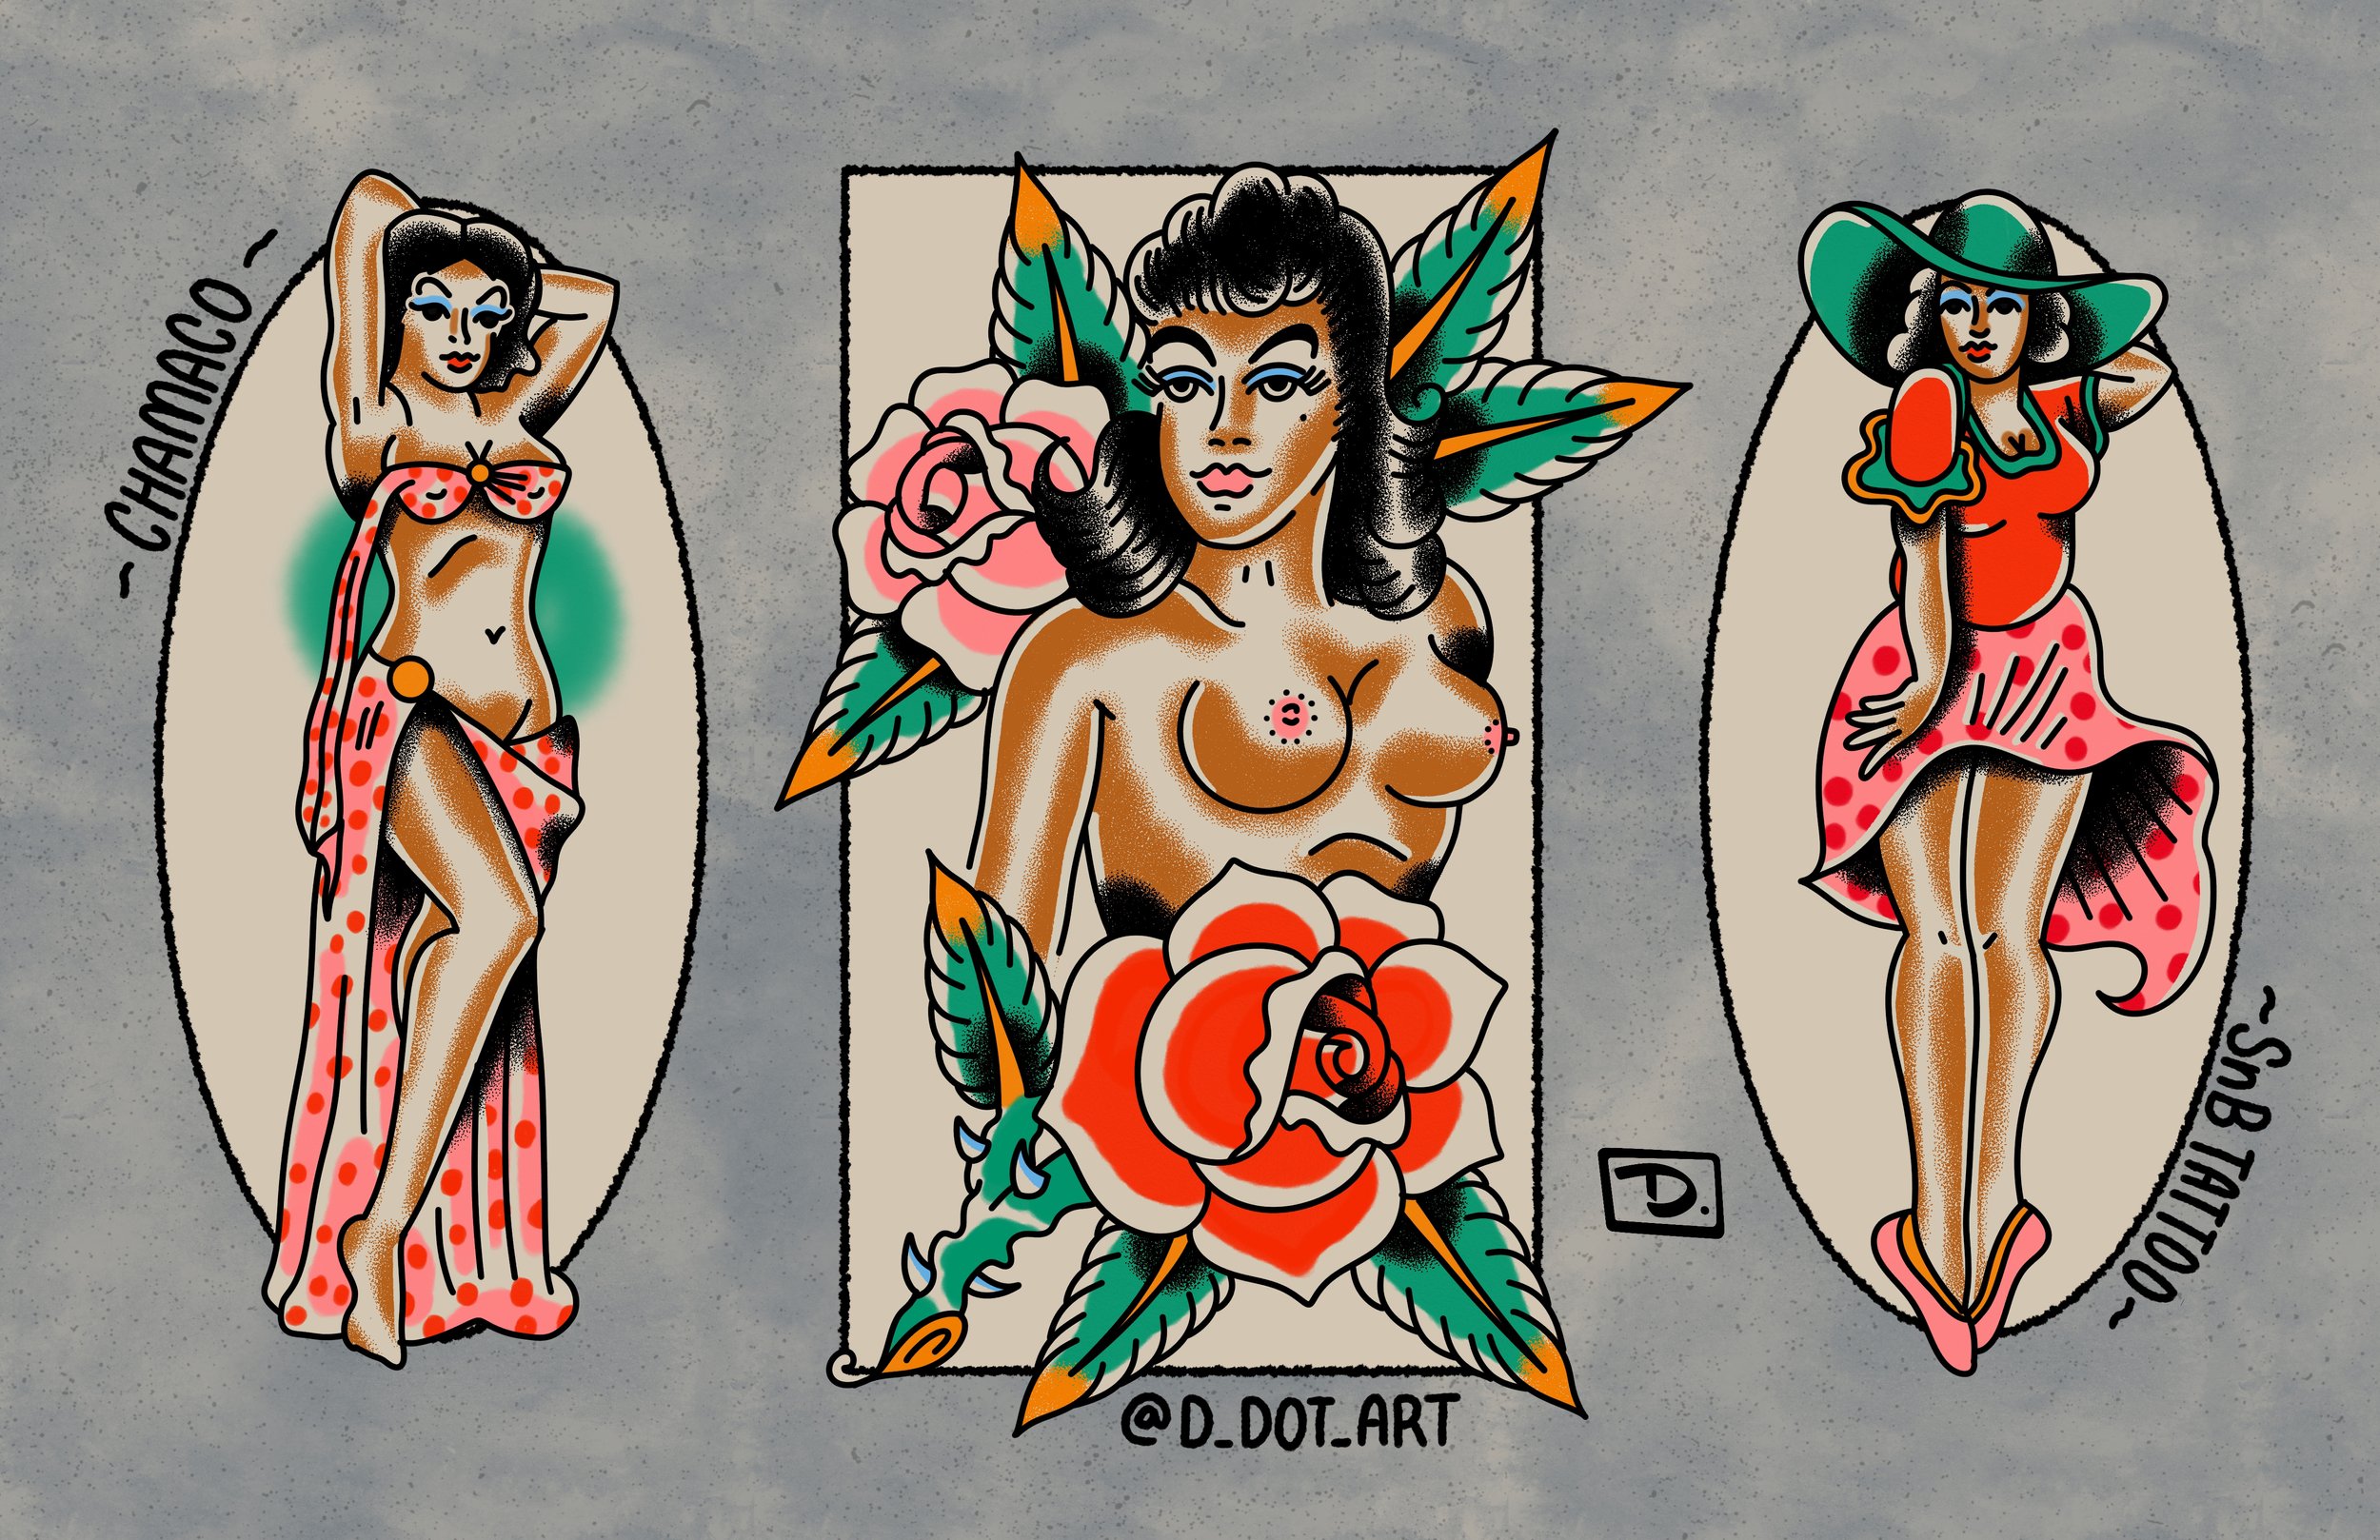 How to Draw a Vintage Pin-Up Portrait Tattoo Illustration | Envato Tuts+